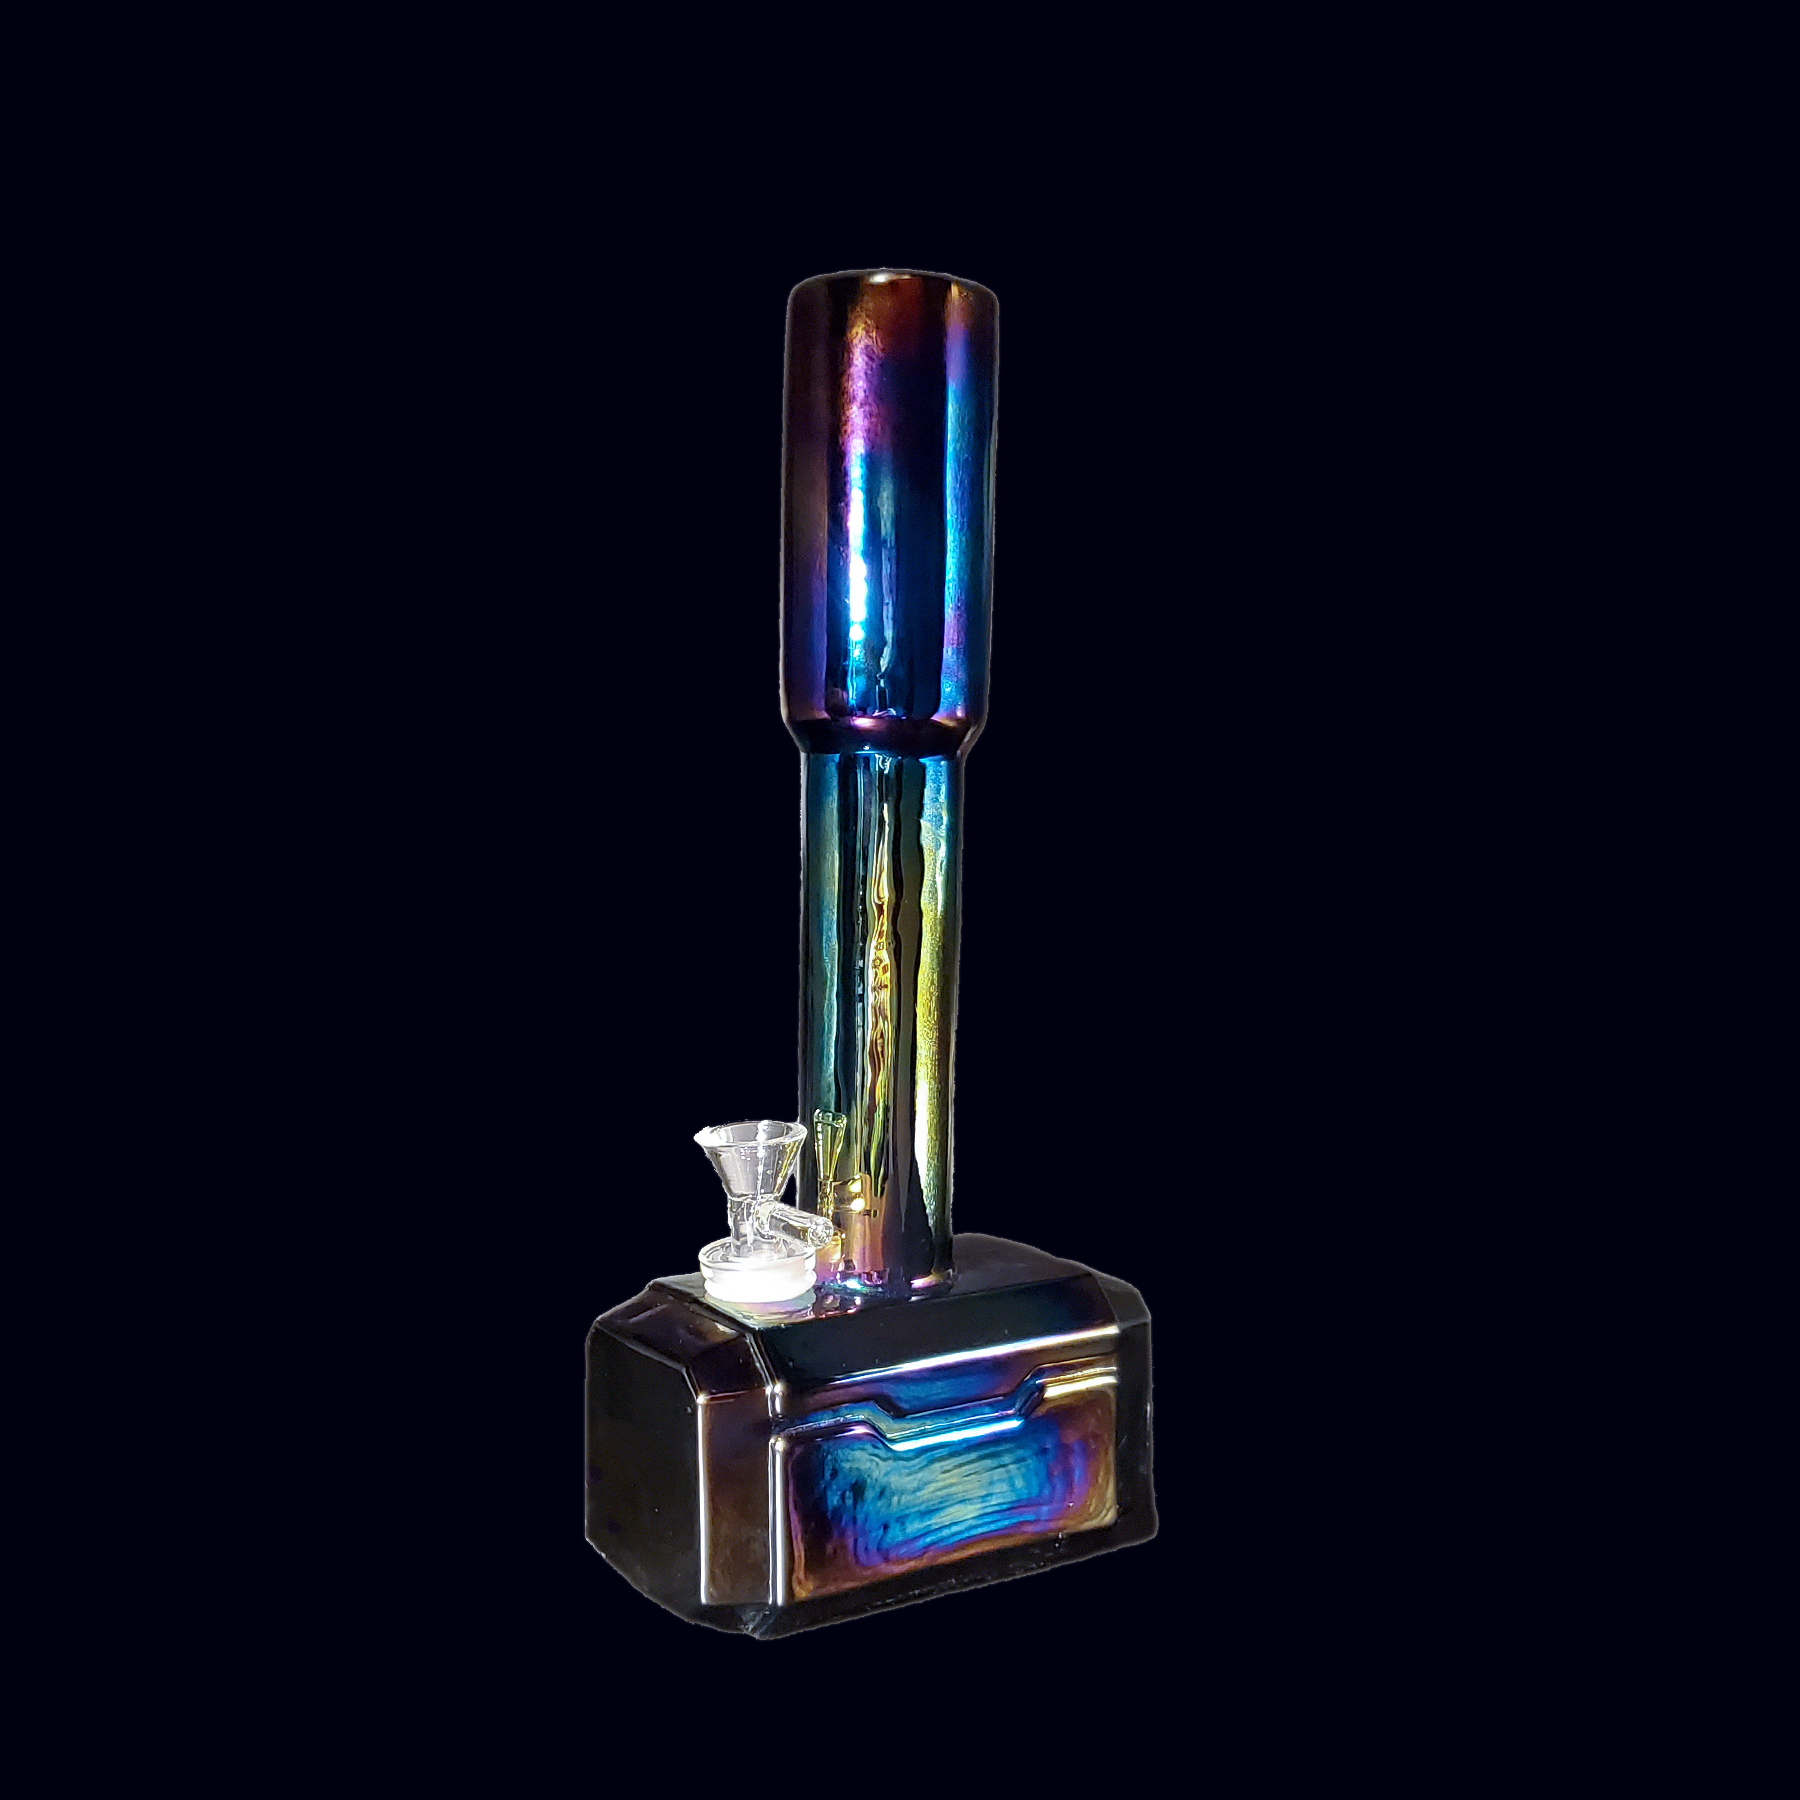 A colorful glass object with a tissue dispenser.